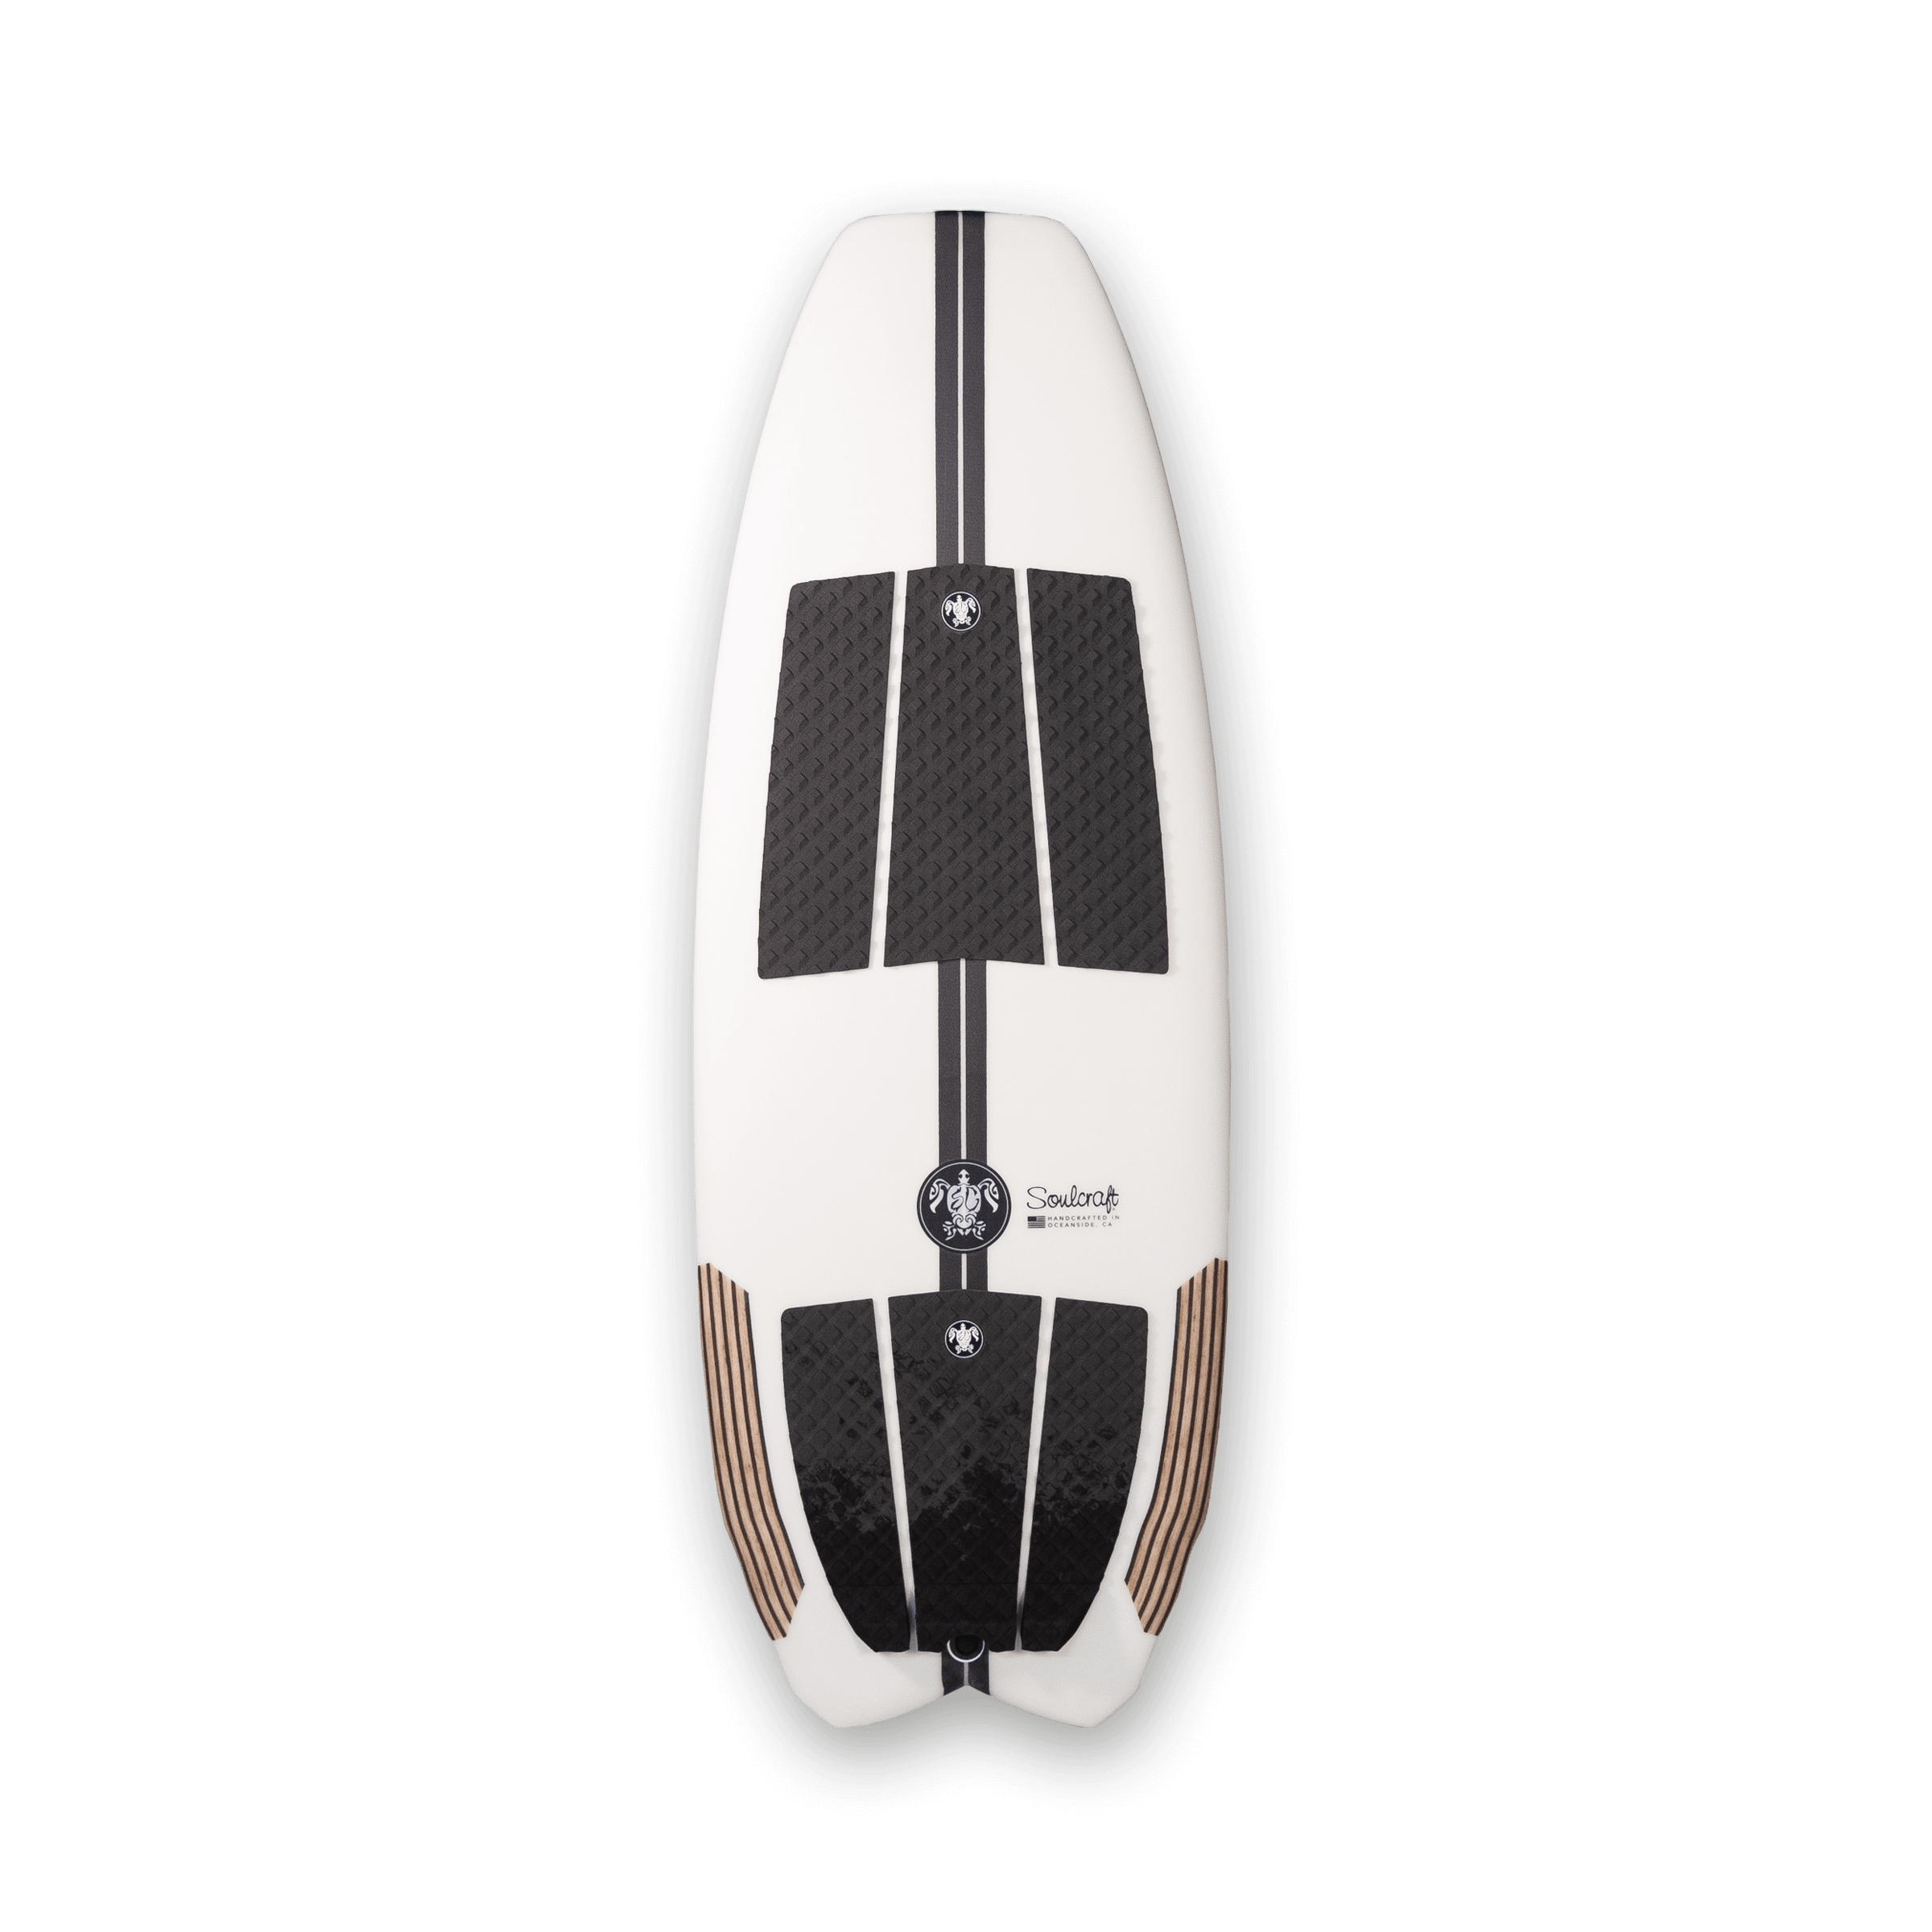 A white and black Soulcraft KF Pro Surf Wakesurf Board showcasing performance and efficiency on a sleek black background.